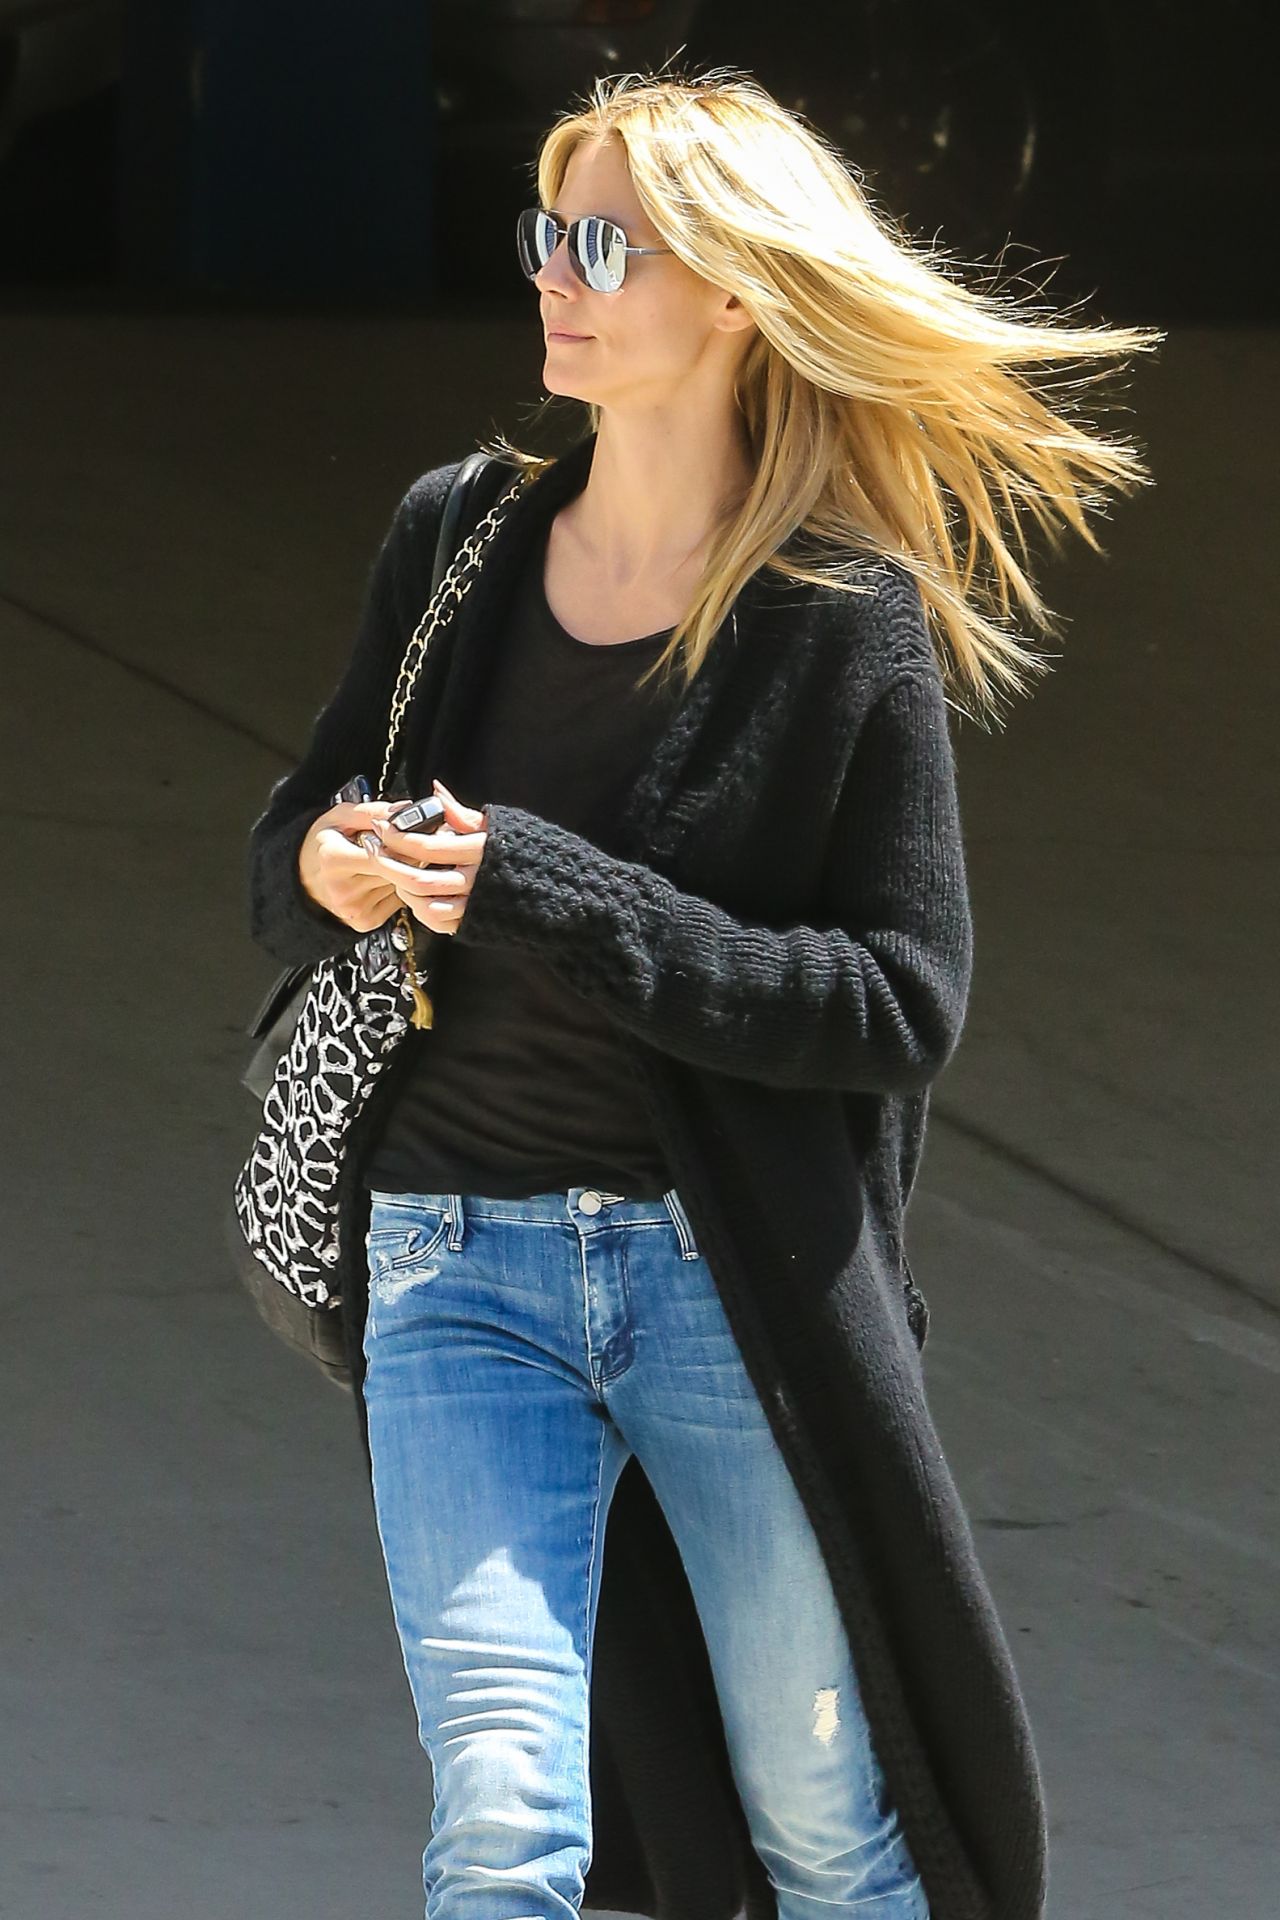 Heidi Klum in Jeans - Stops by a Medical Building, April 